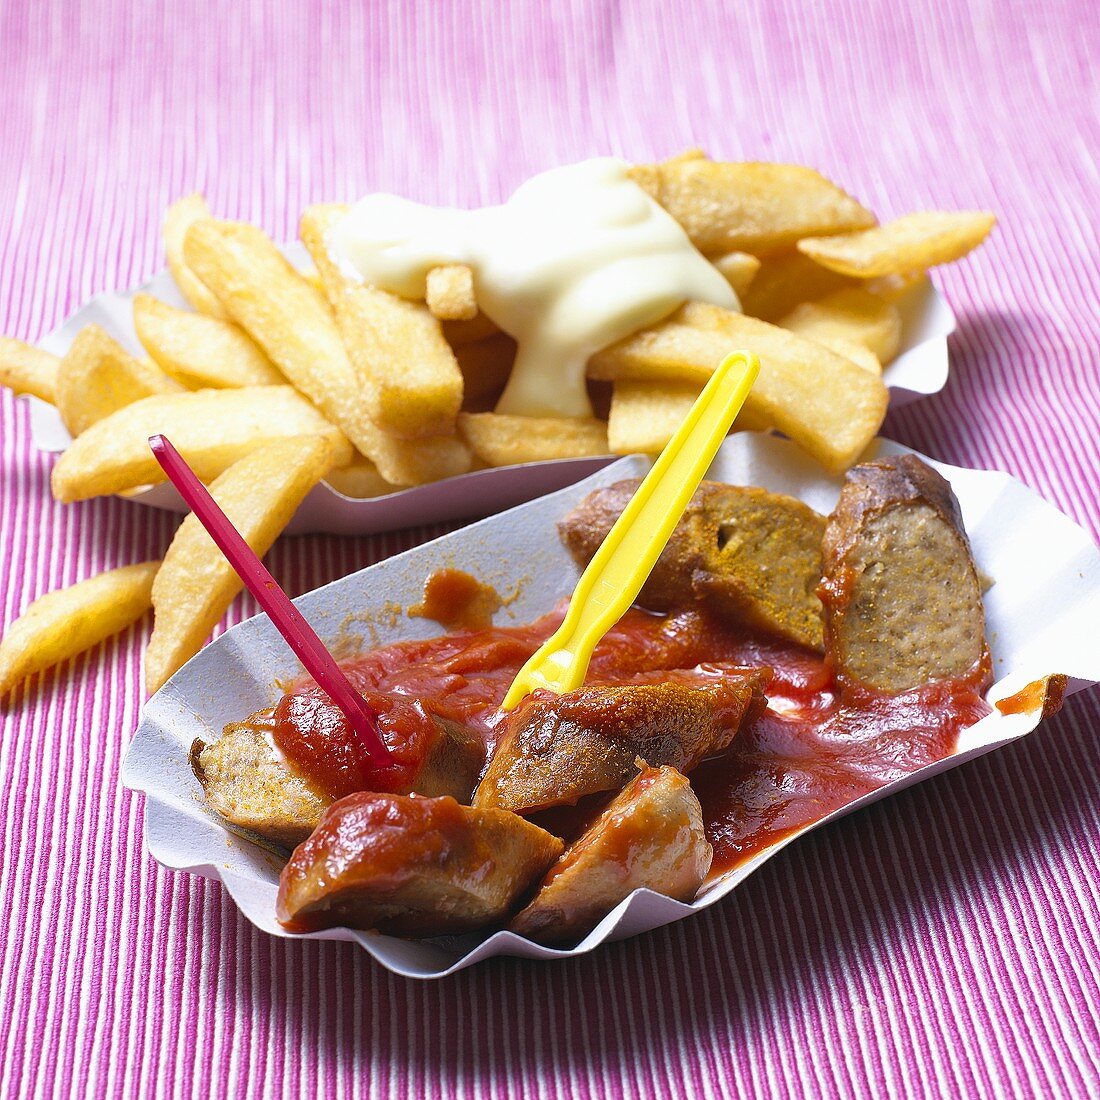 Vegetarian currywurst sausage with chips